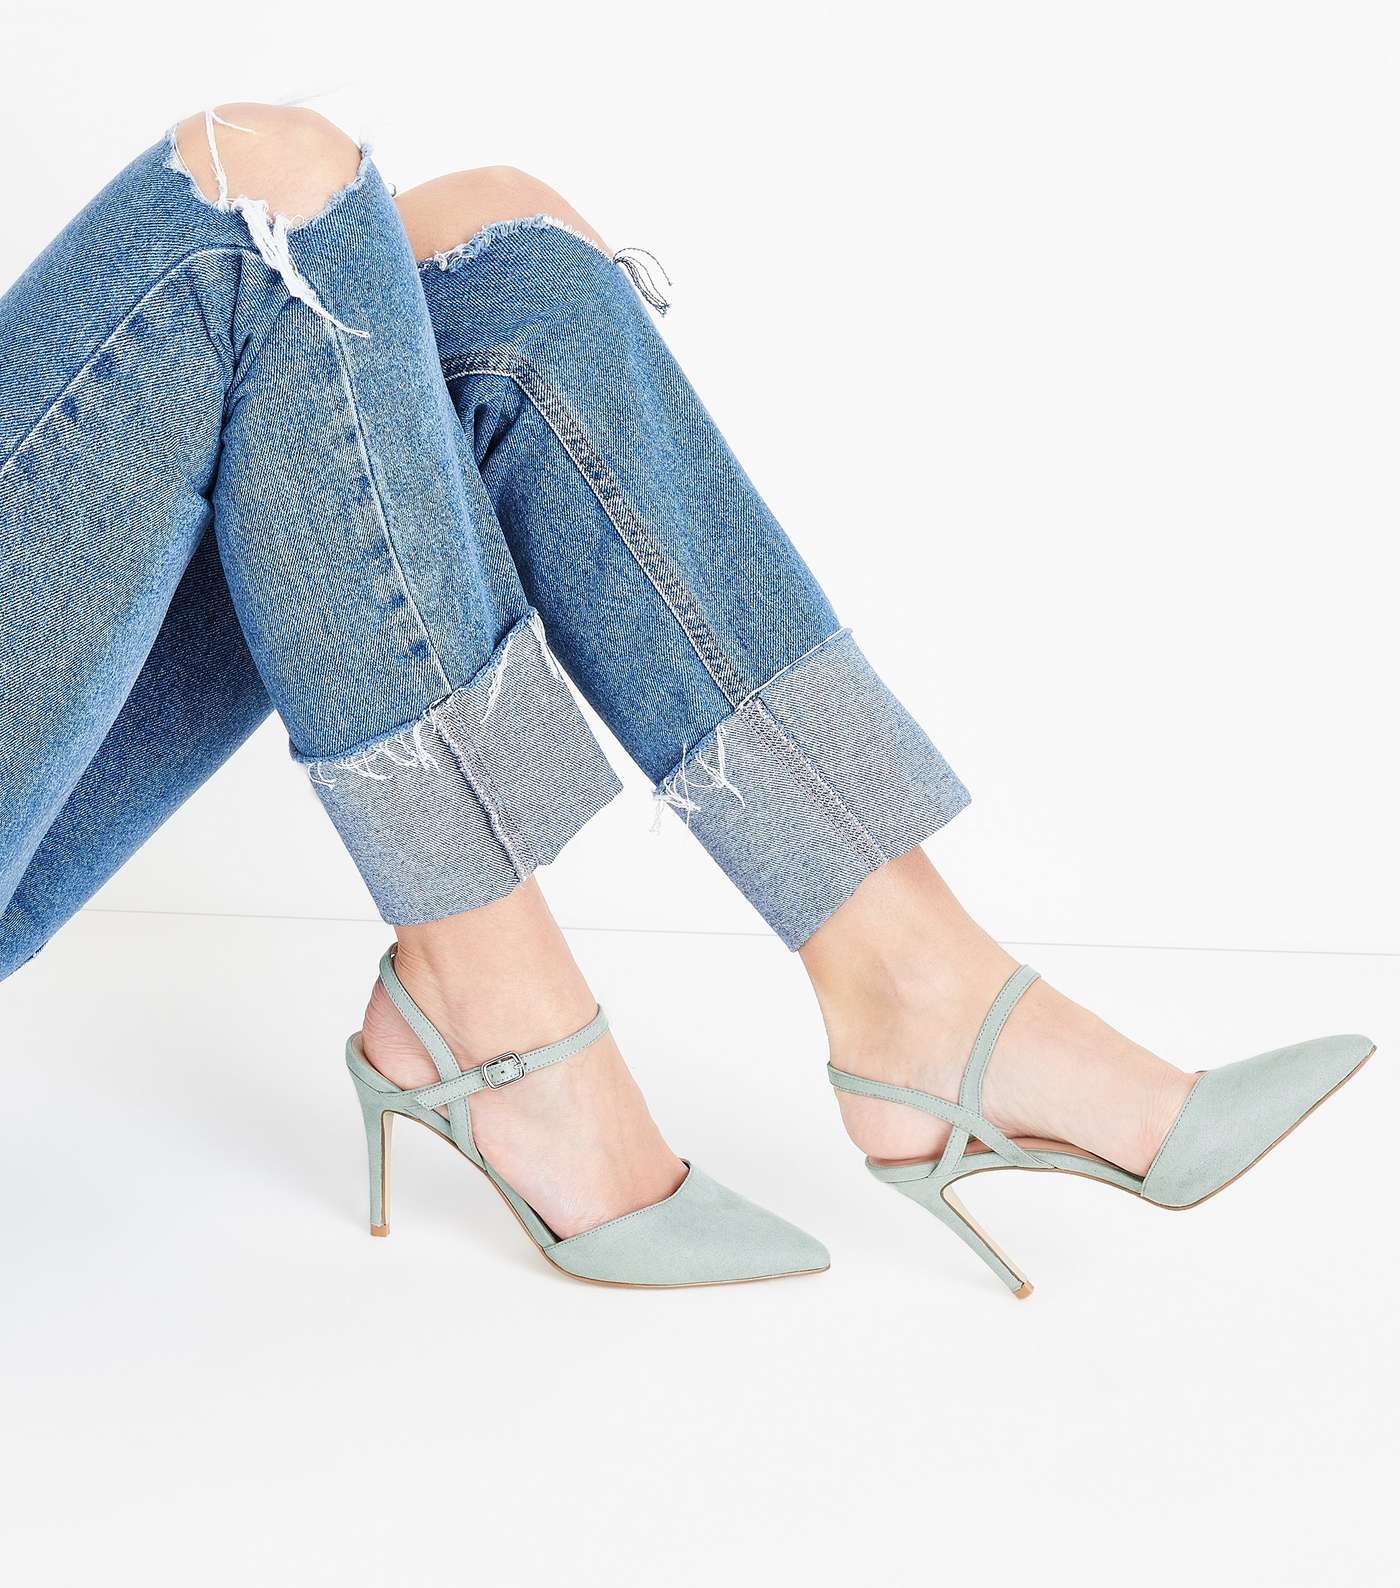 Mint Green Suedette Ankle Strap Pointed Court Shoes Image 2